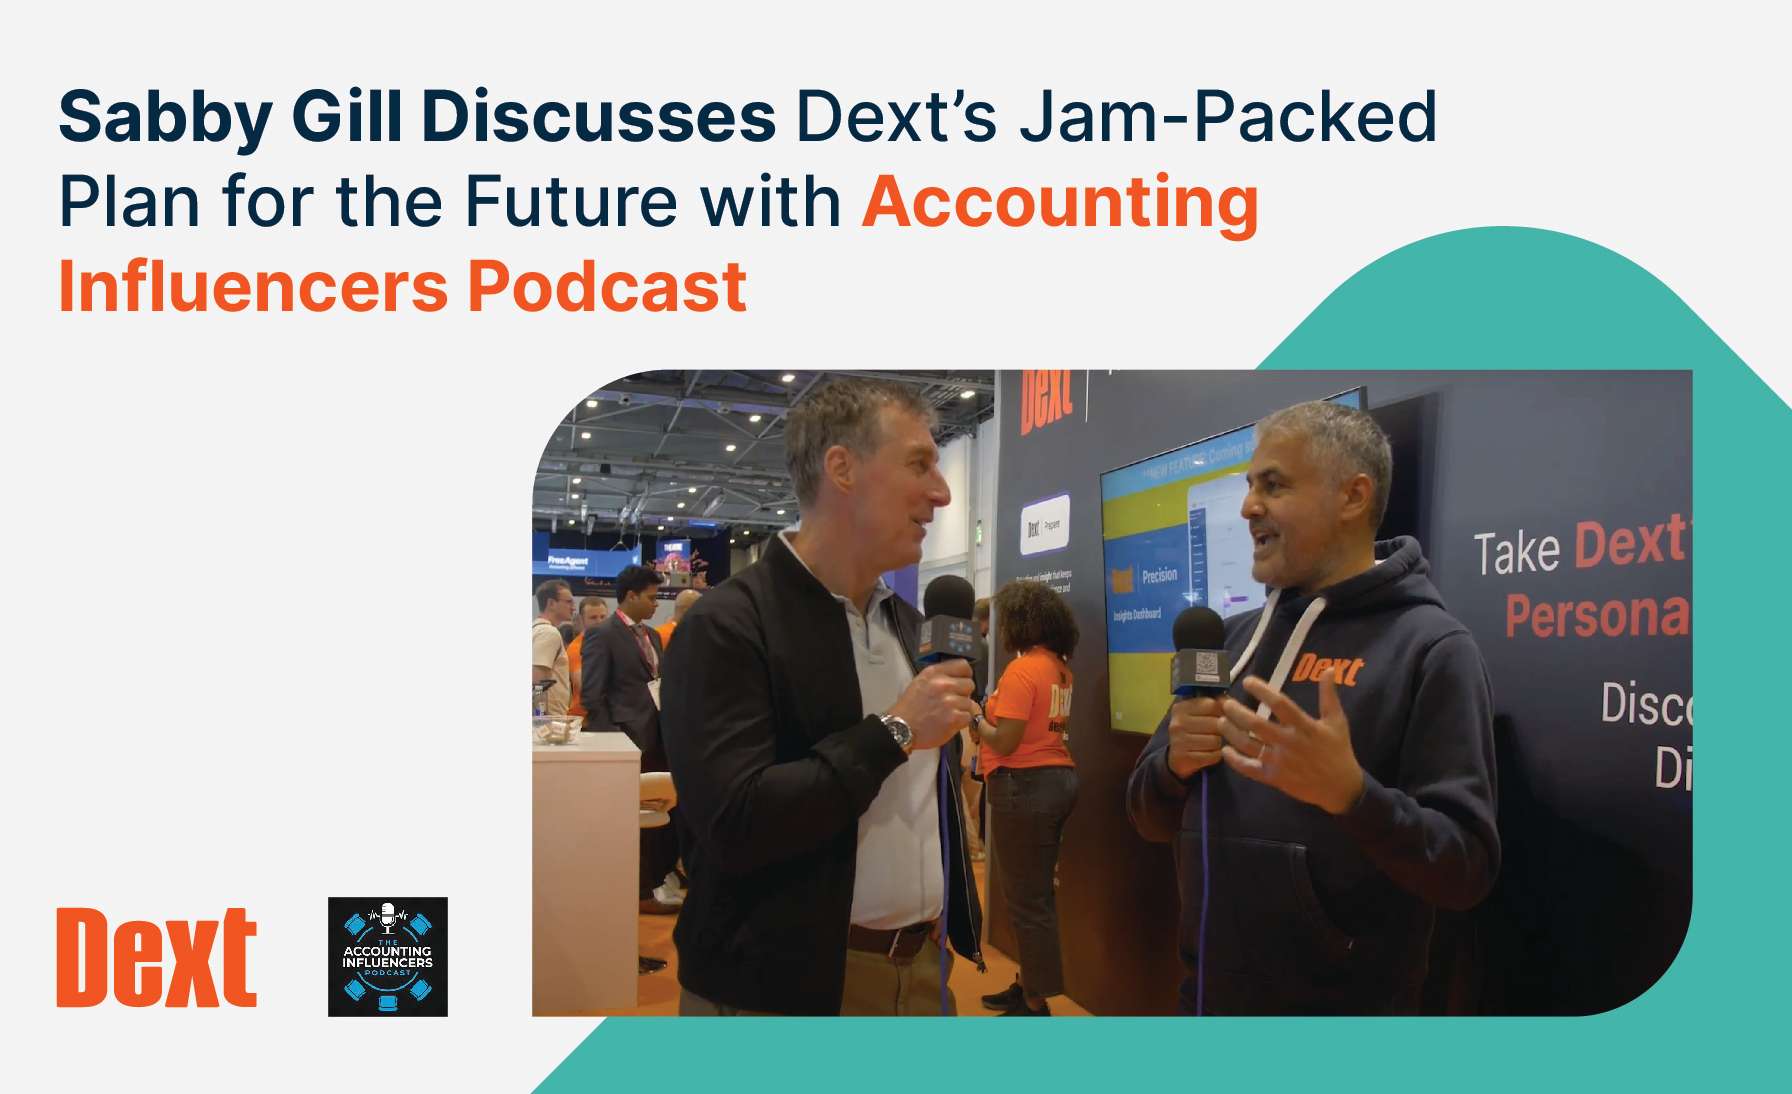 Sabby Gill Discusses Dext’s Jam-Packed Plan for the Future